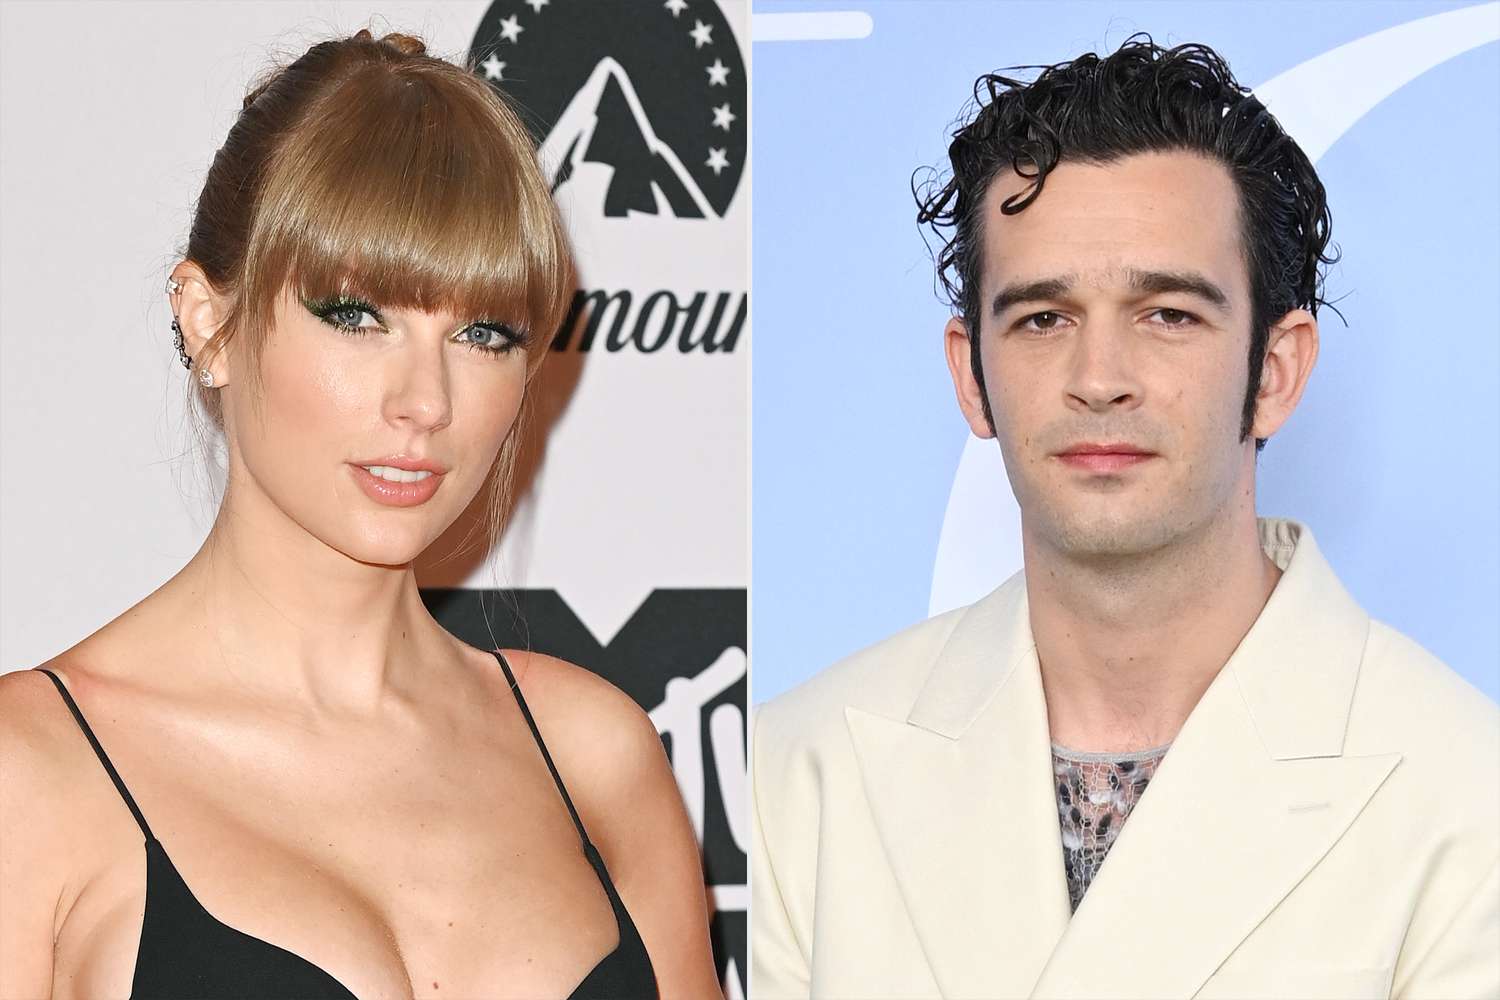 Taylor Swift and the 1975 frontman Matty Healy break up after brief romance